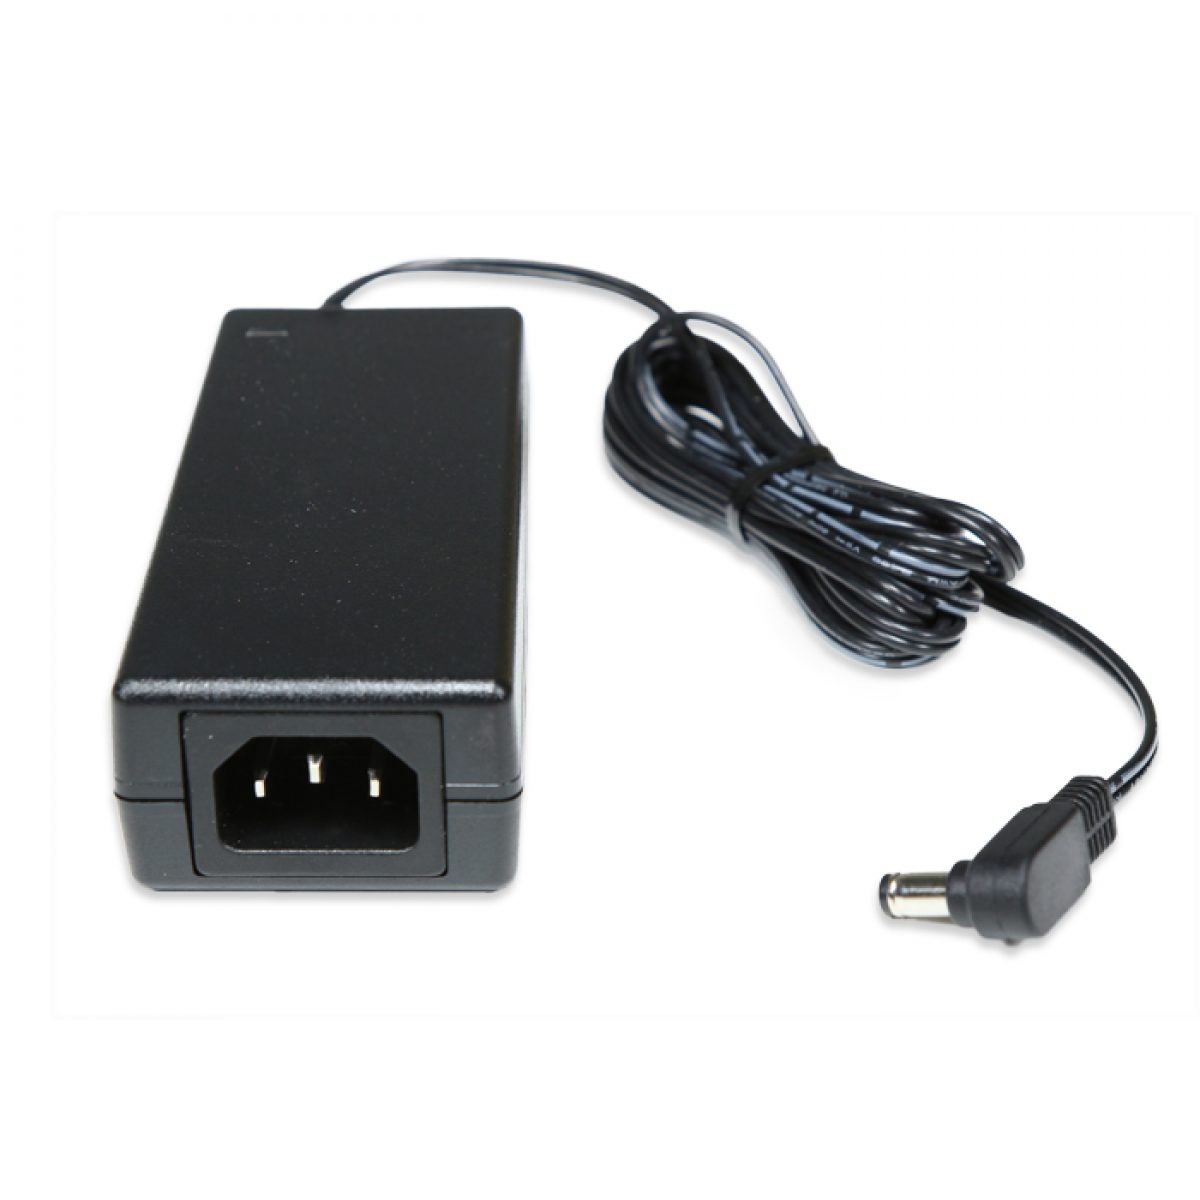 Buy Standard 5V 1A Power Supply with 5.5mm DC Plug Online at